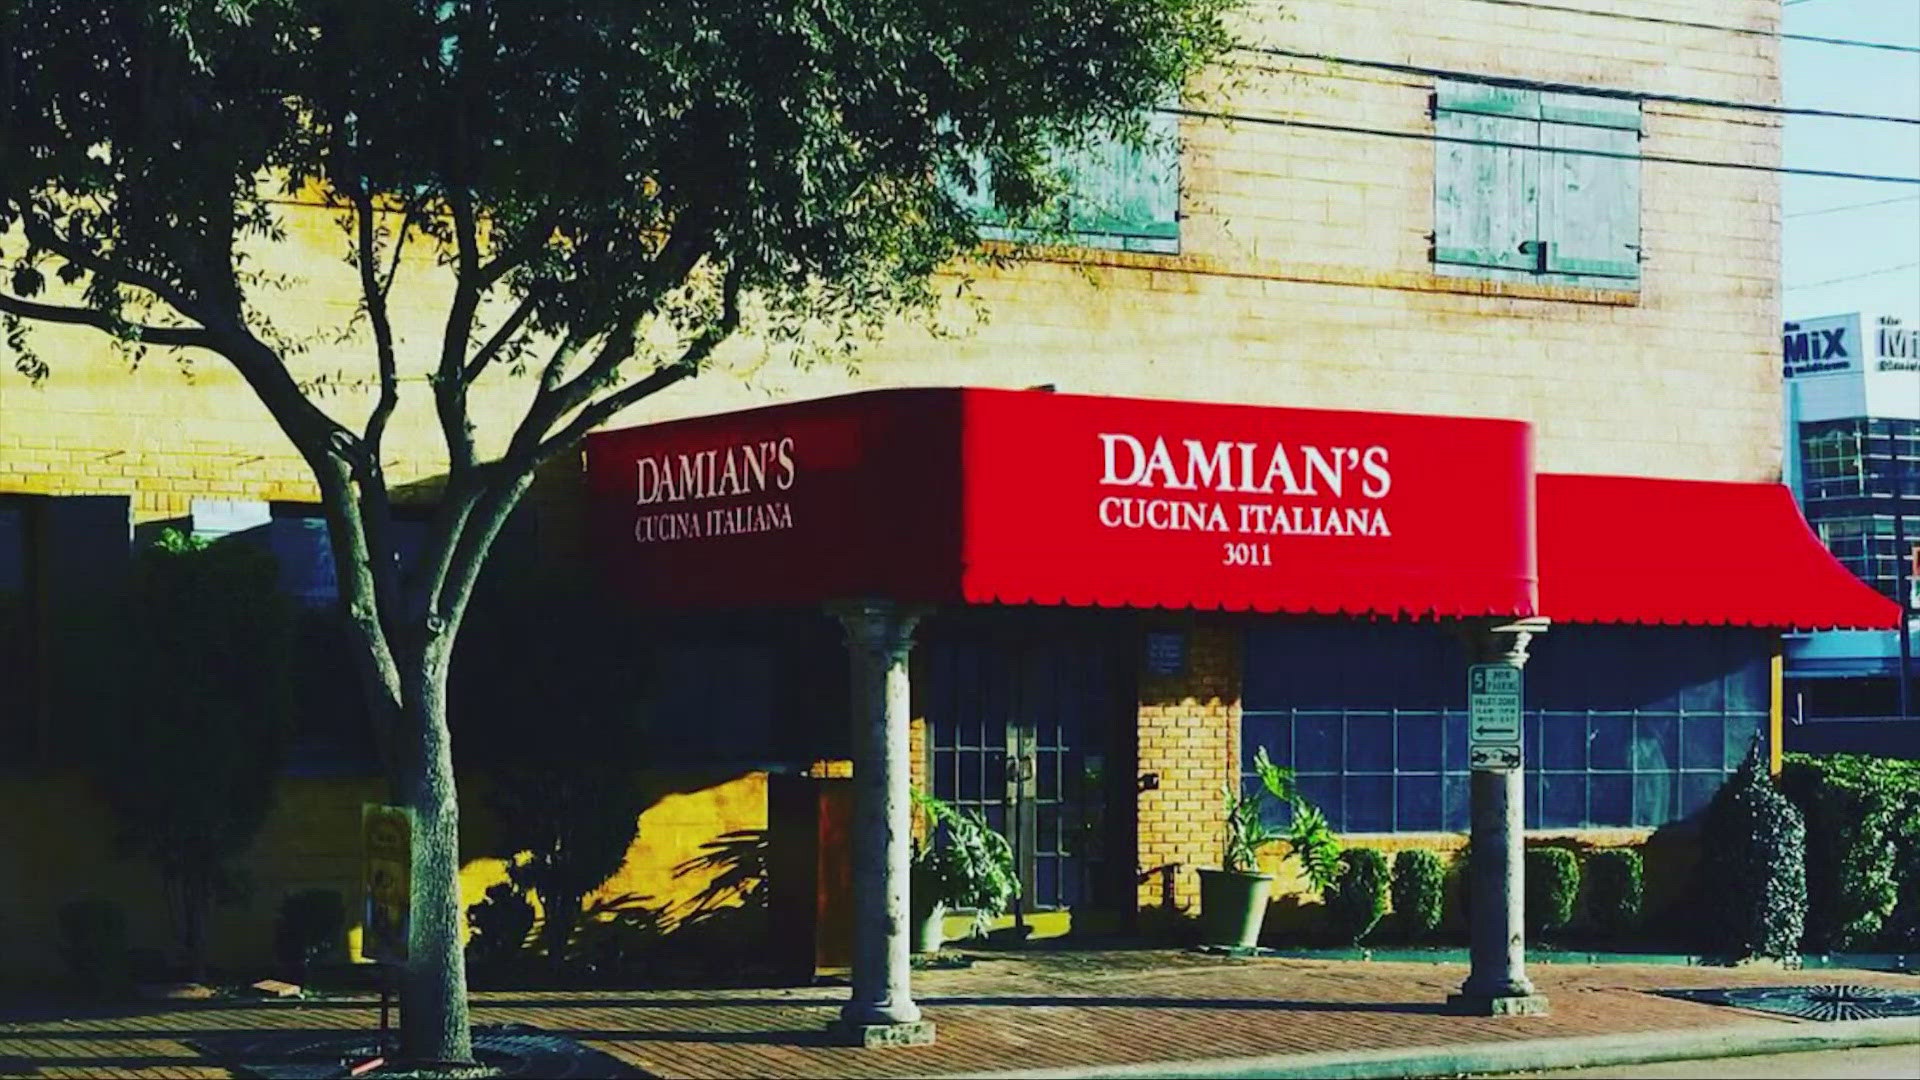 Damian's Cucina Italiana announced on social media they're shutting down for good in August after 41 years in business.